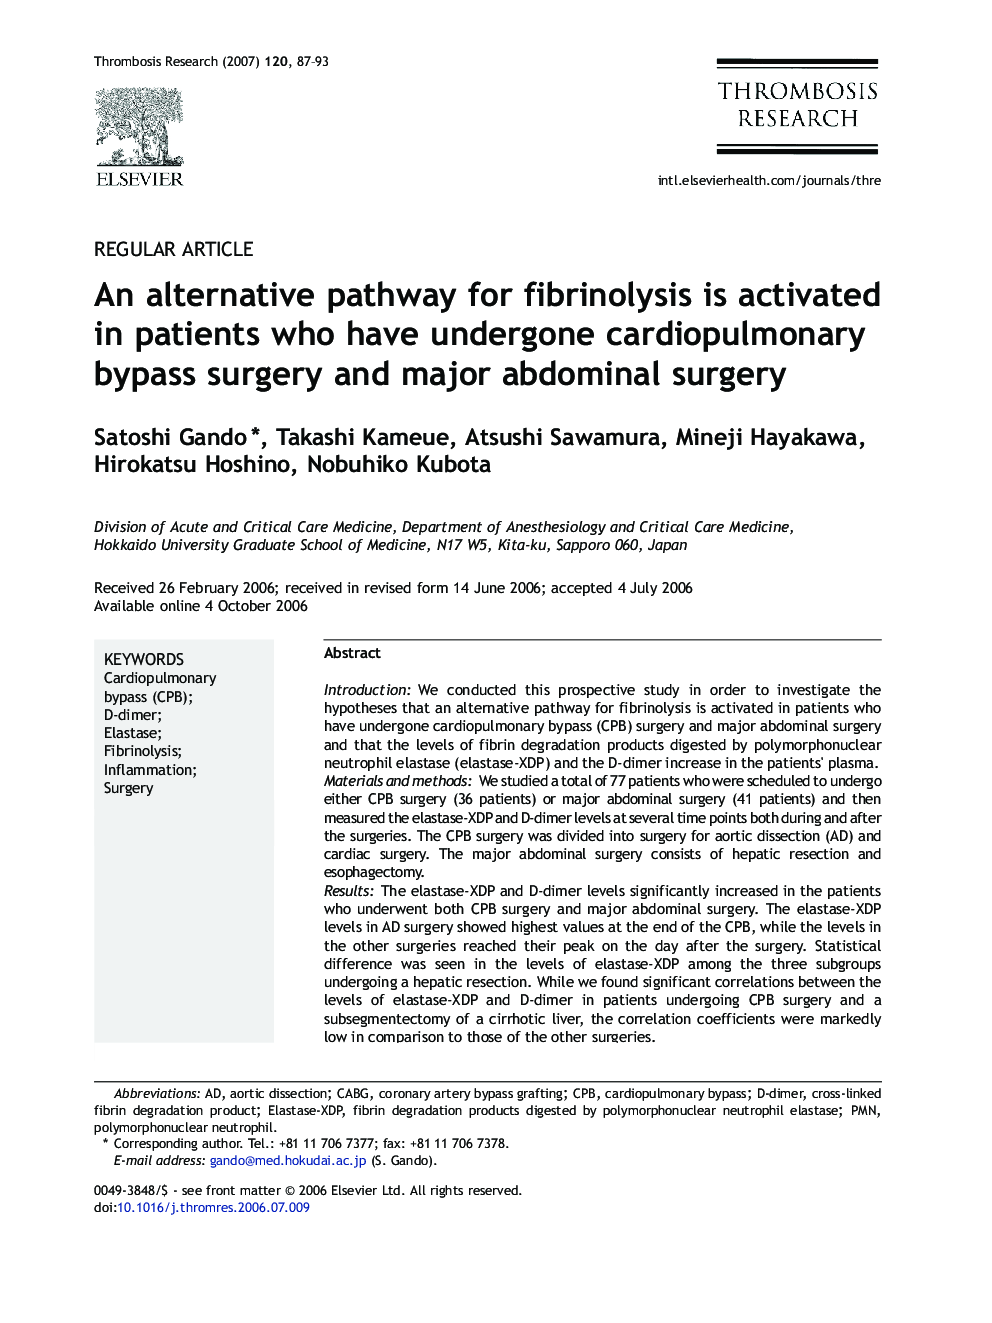 An alternative pathway for fibrinolysis is activated in patients who have undergone cardiopulmonary bypass surgery and major abdominal surgery